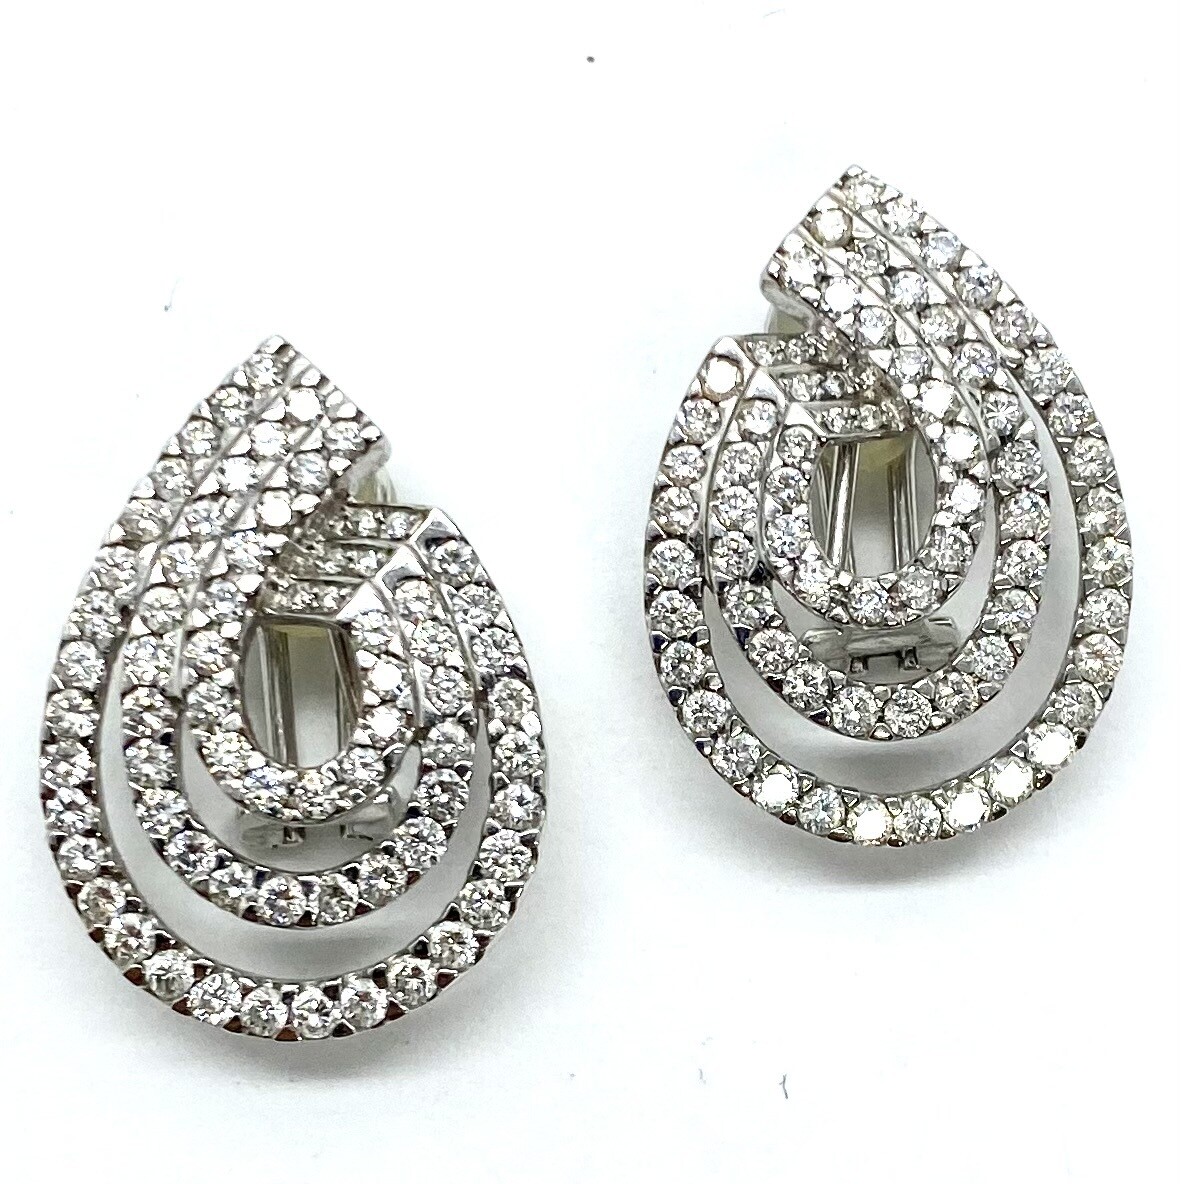 Estate Gold and Diamond Earrings